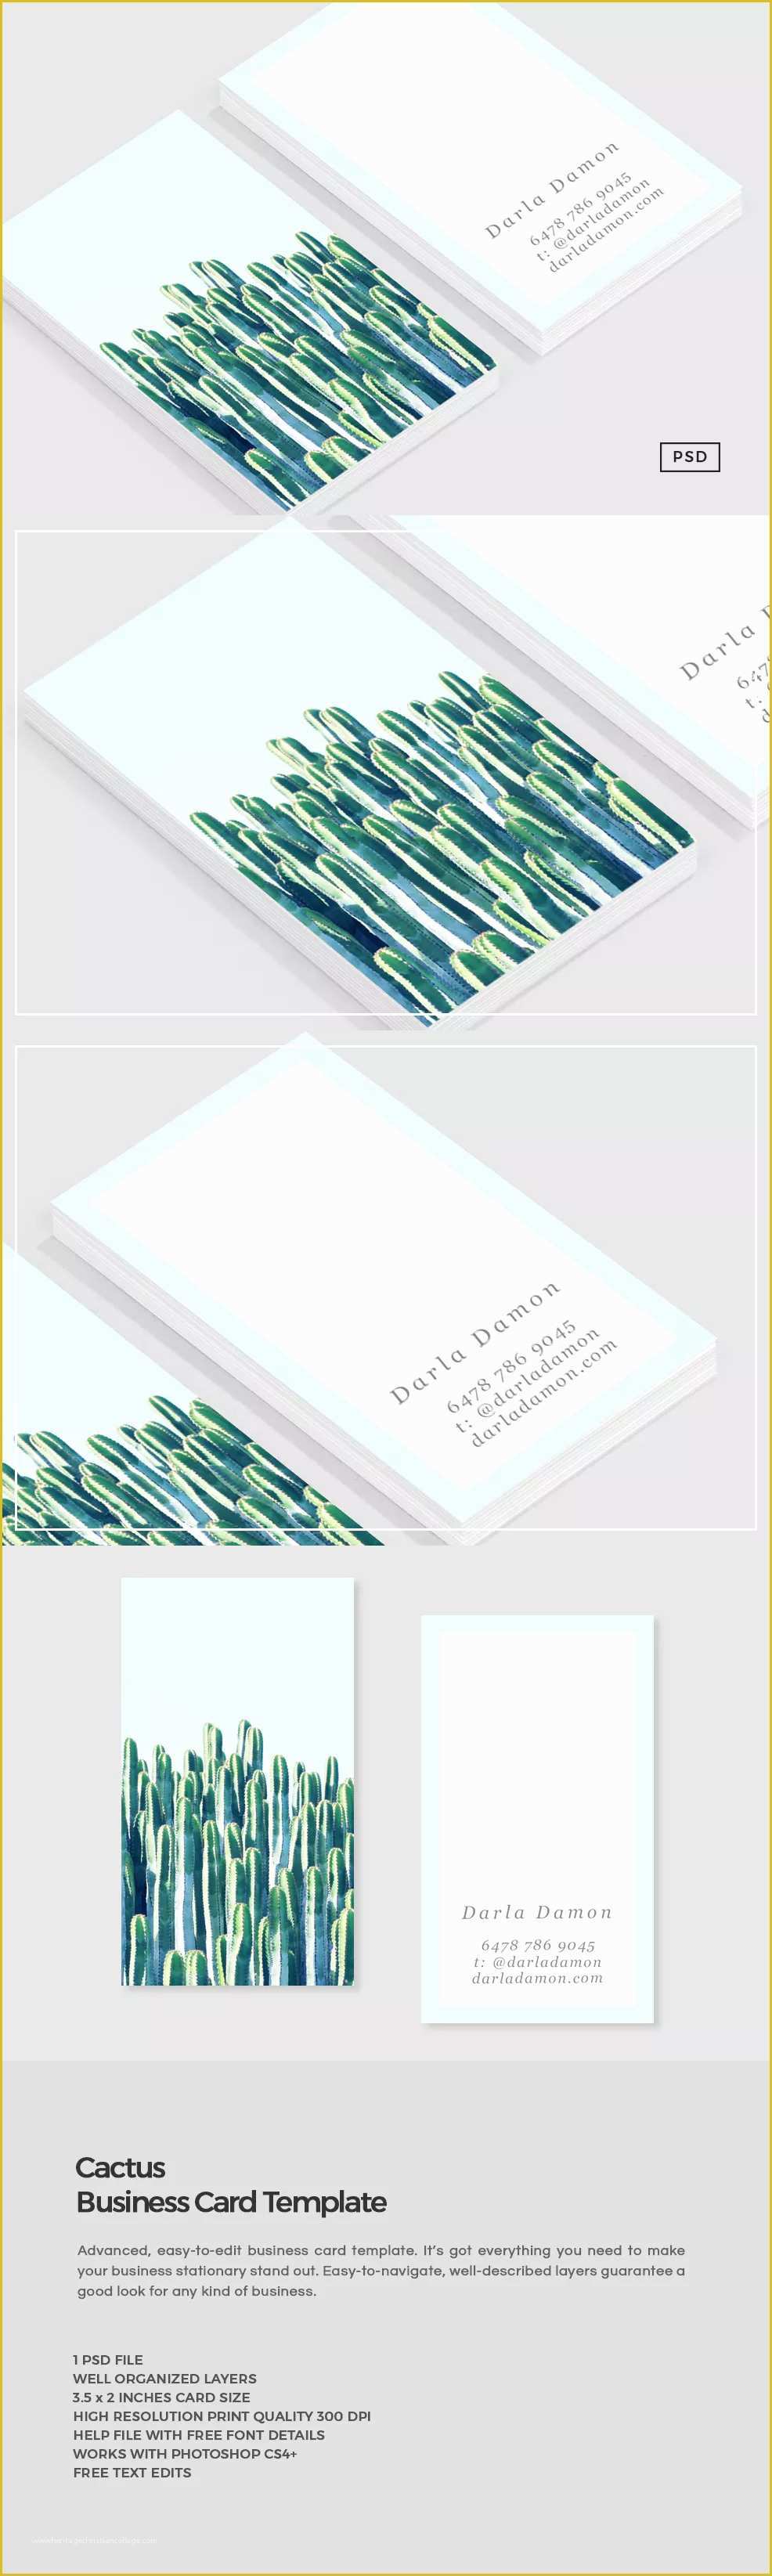 Business Card Template Maker Free Of Fresh Make Your Own Free Printable Business Cards